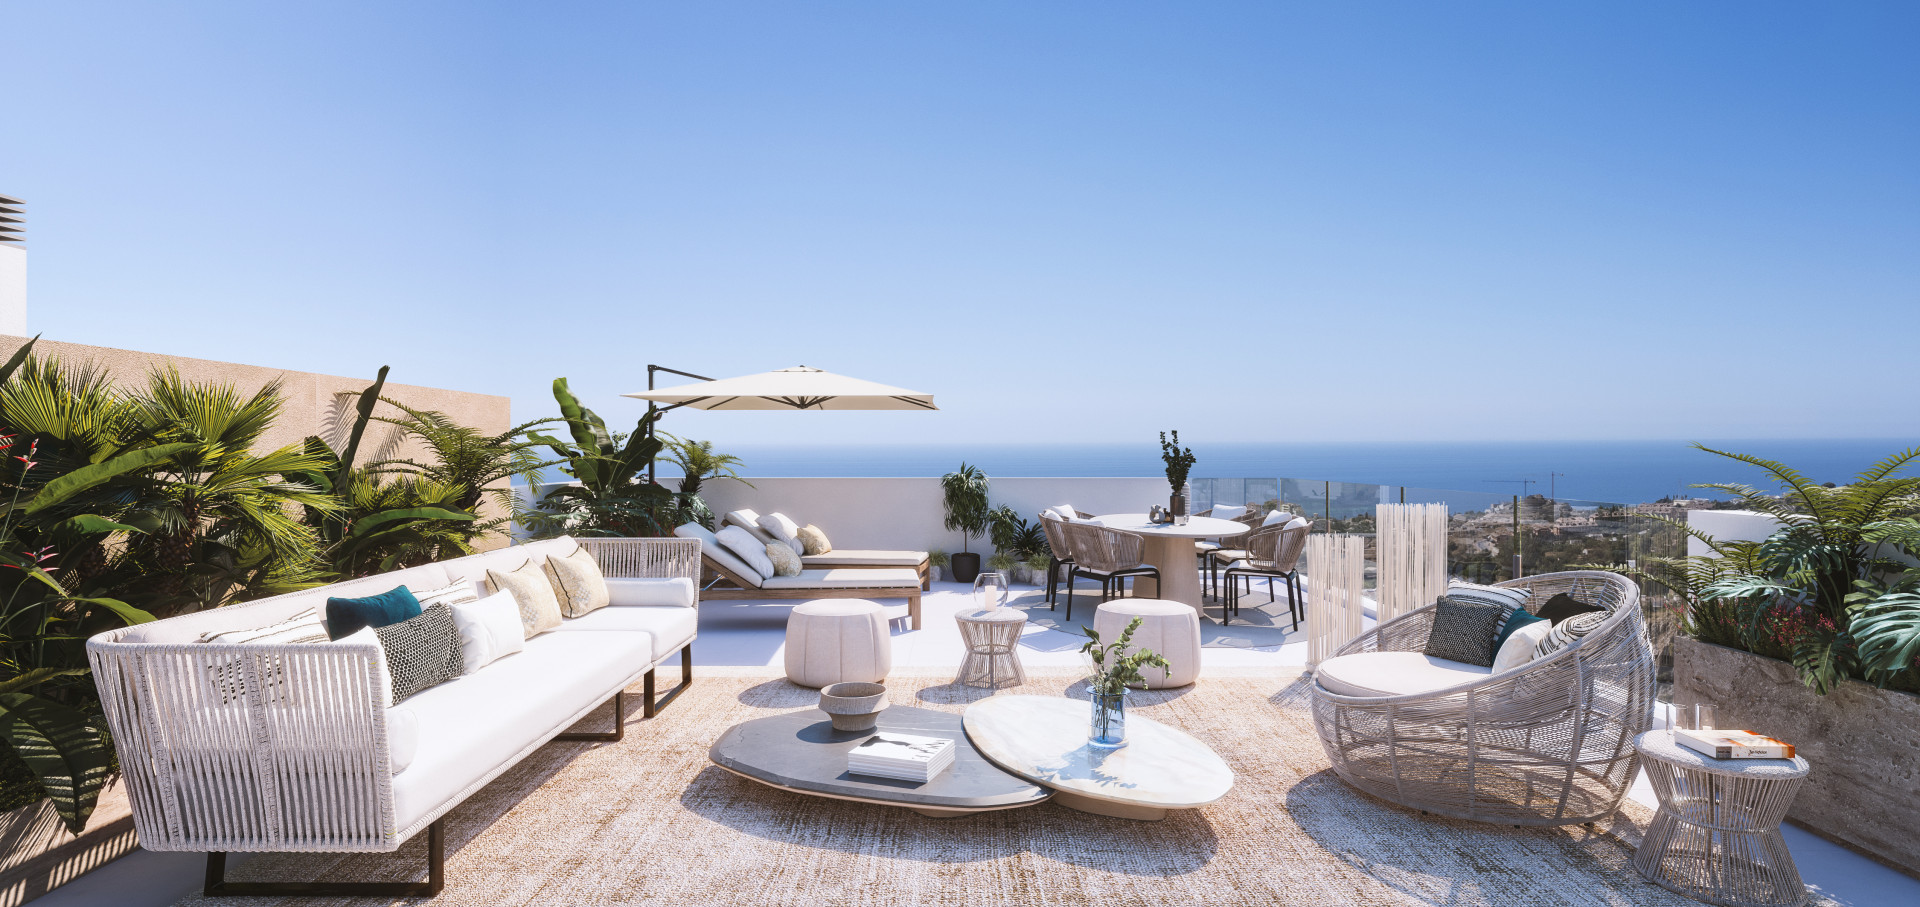 Off-plan modern apartments, penthouses and townhouses for sale in Benalmádena